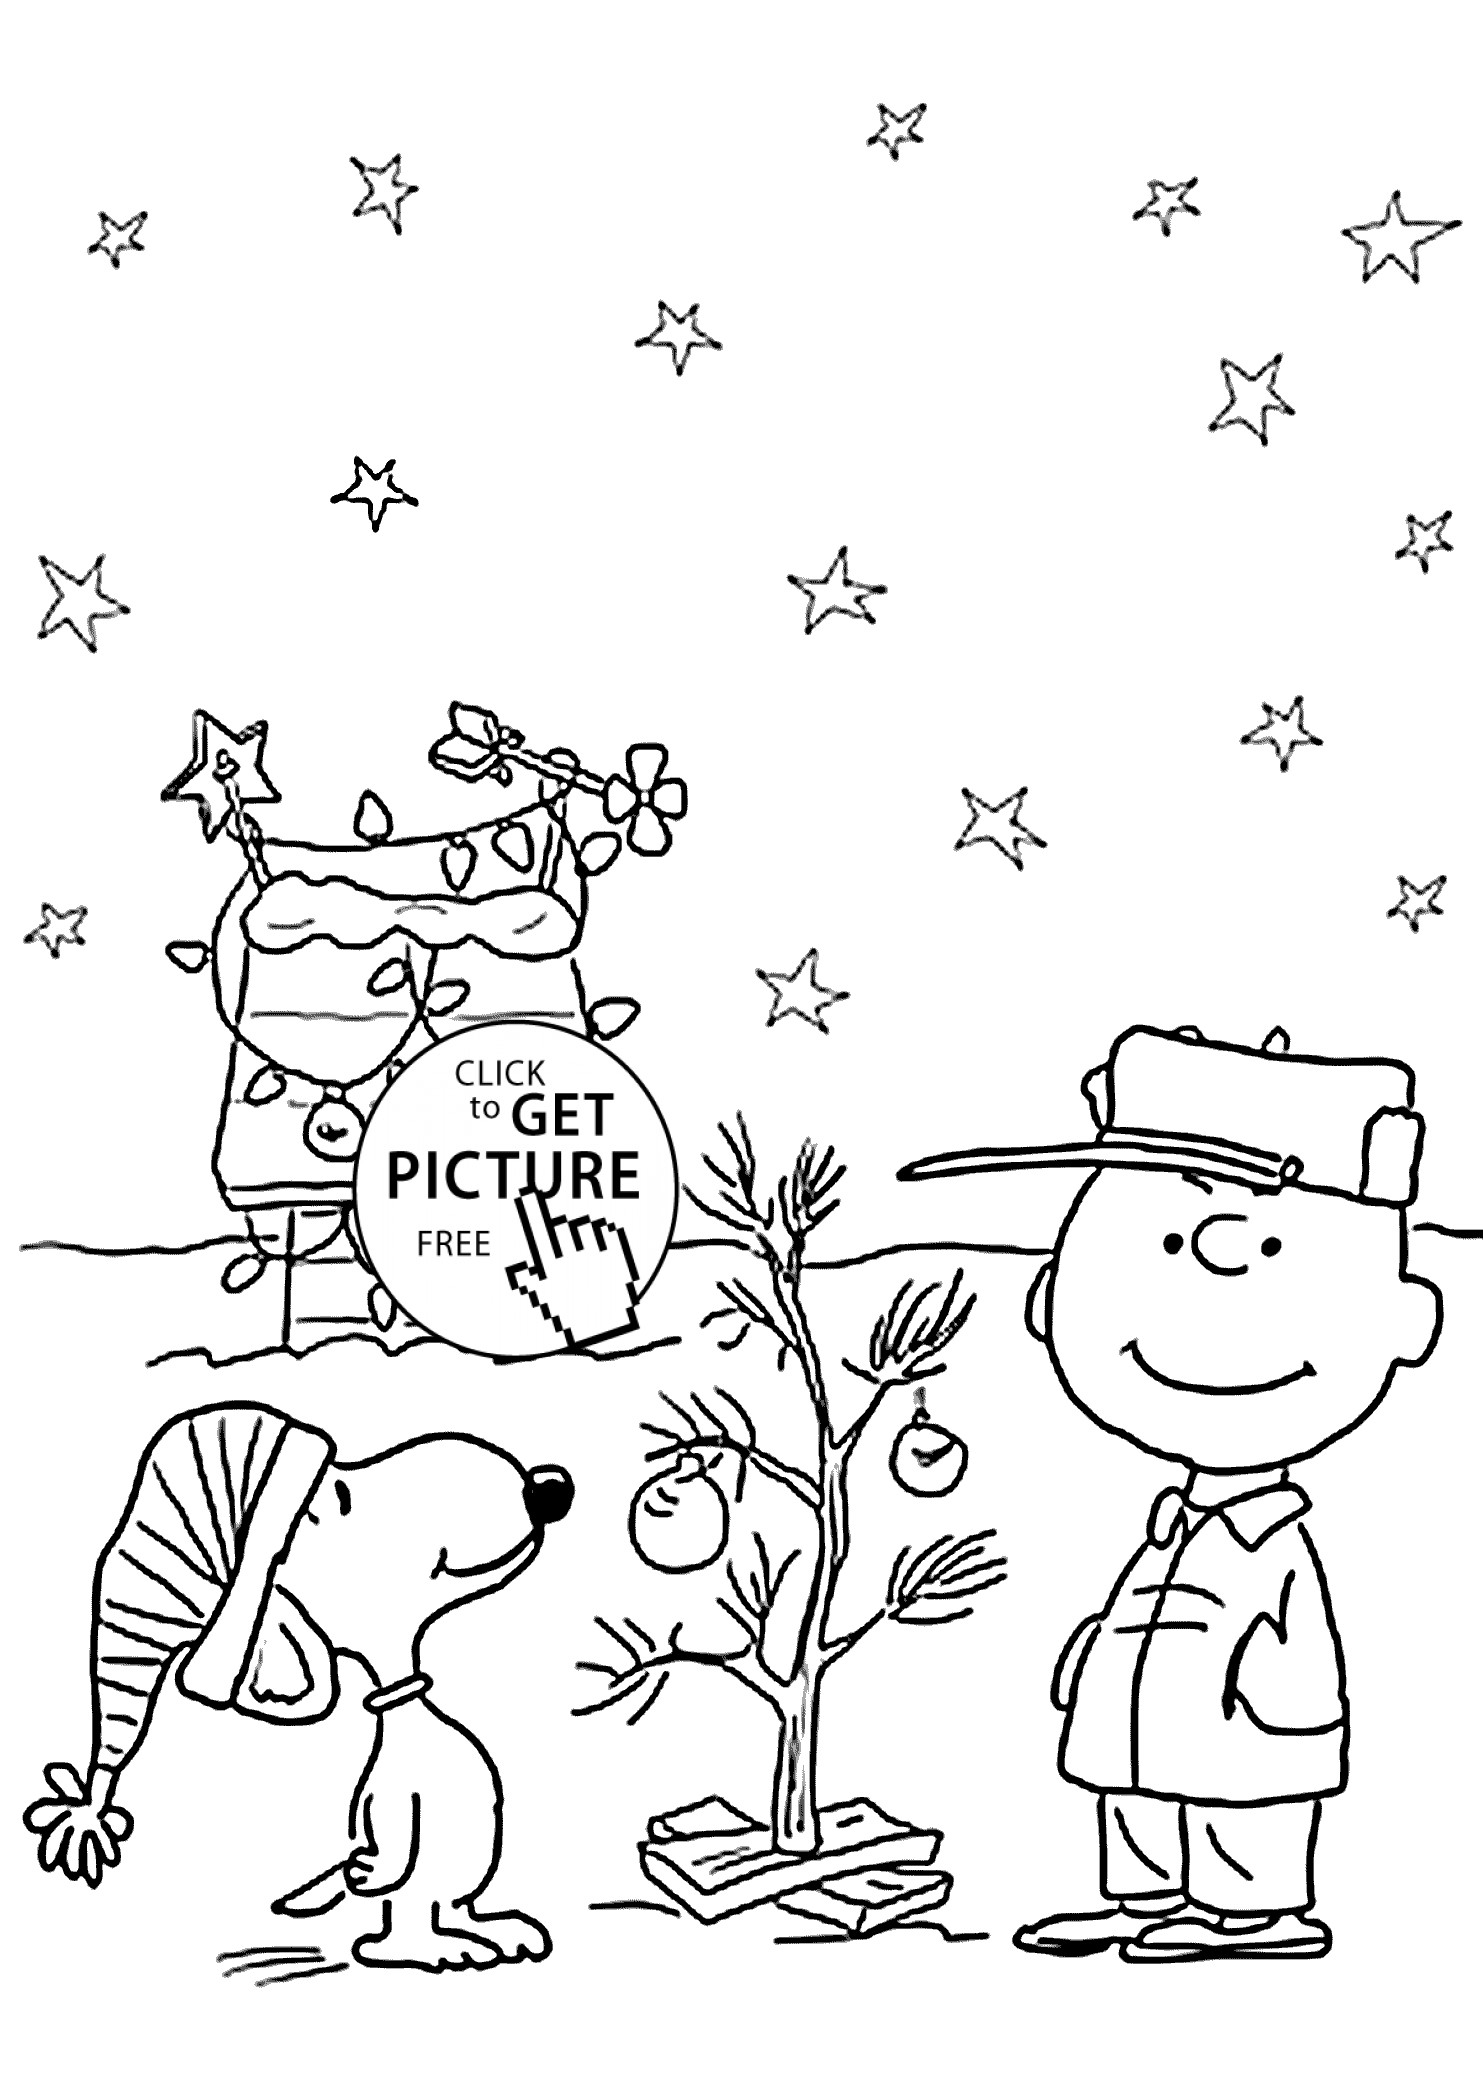 Christmas Coloring Sheets For Kids Free
 Charlie Brown and Christmas coloring pages for kids